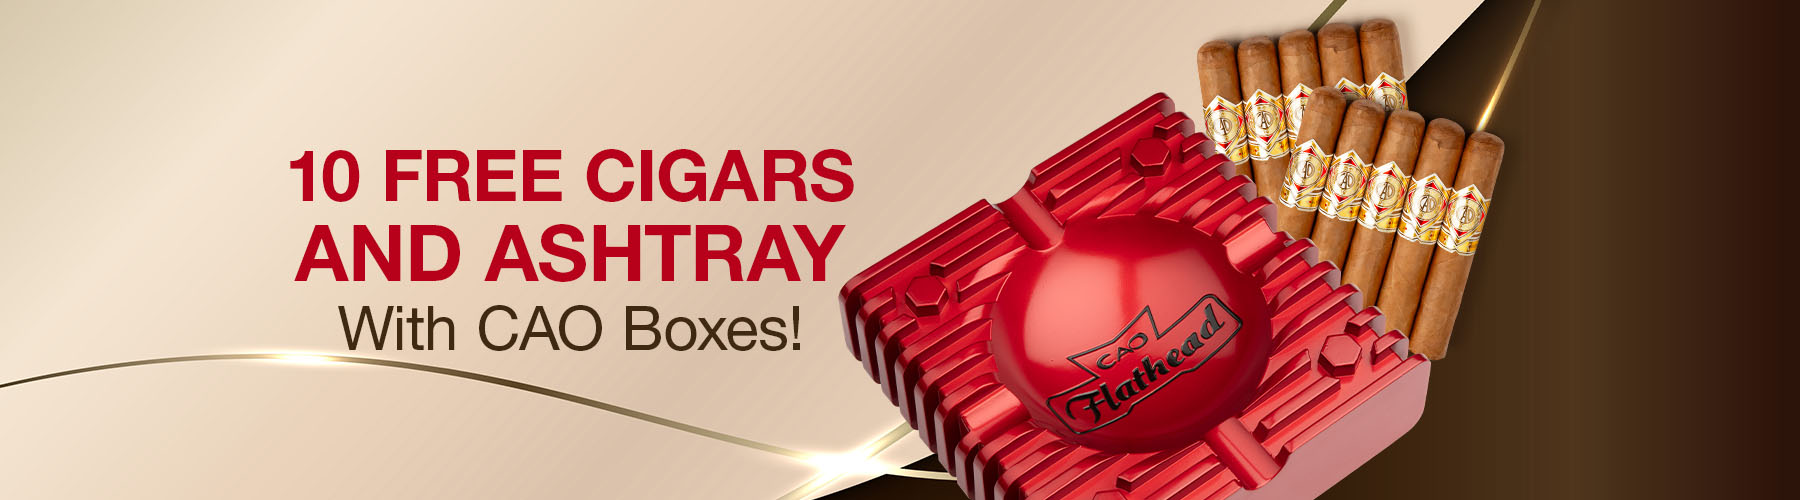 10 Free Cigars and Ashtray with CAO boxes! $112.85 Value